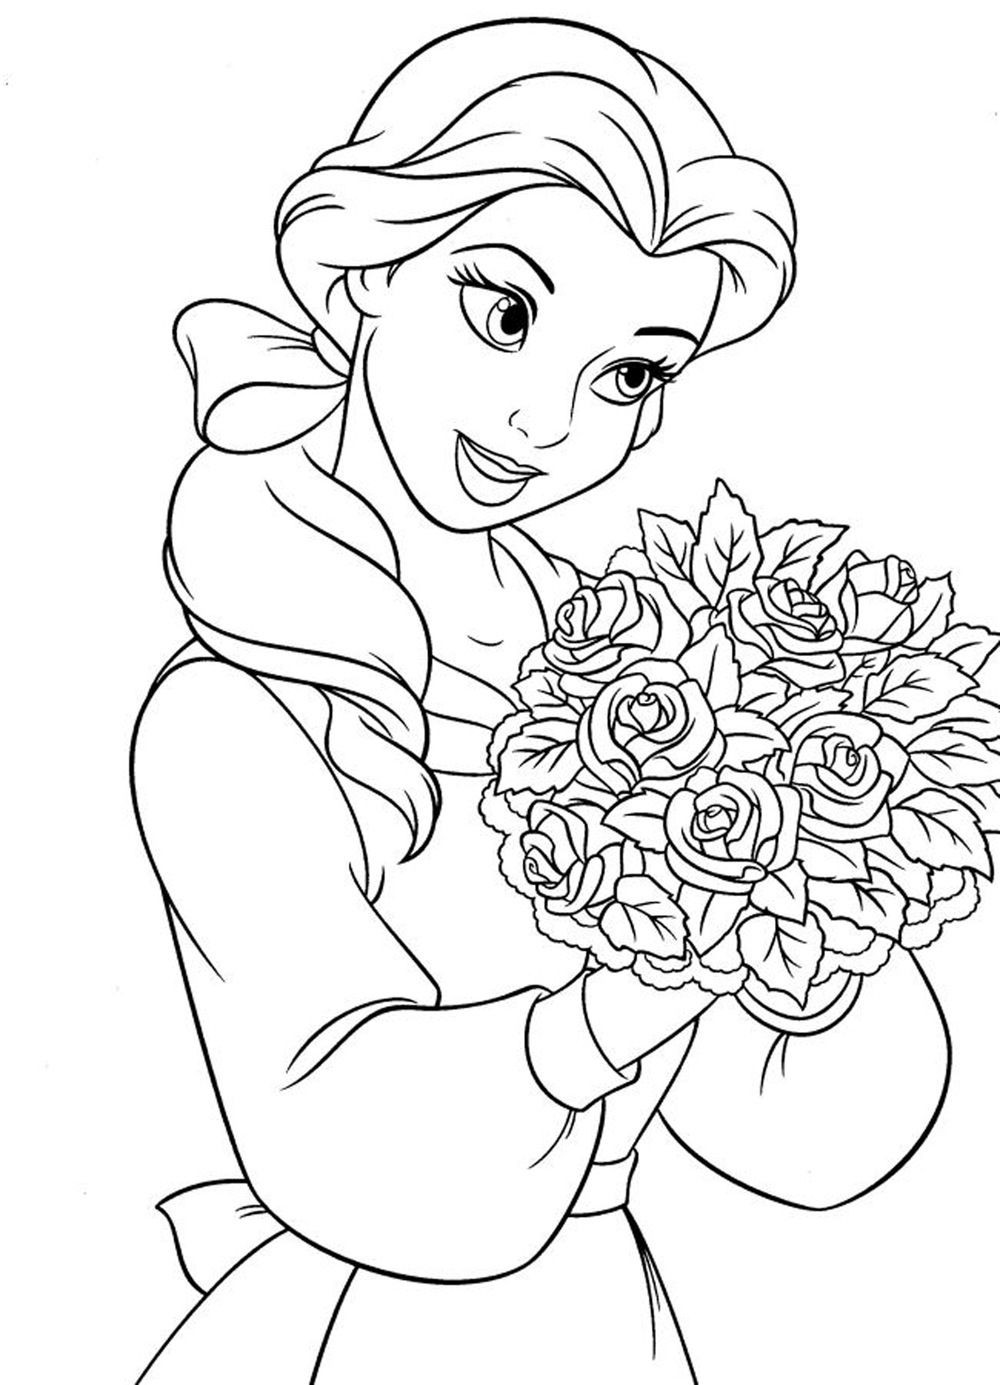 Free Printable Coloring Pages For Girls
 princess coloring pages for girls Free